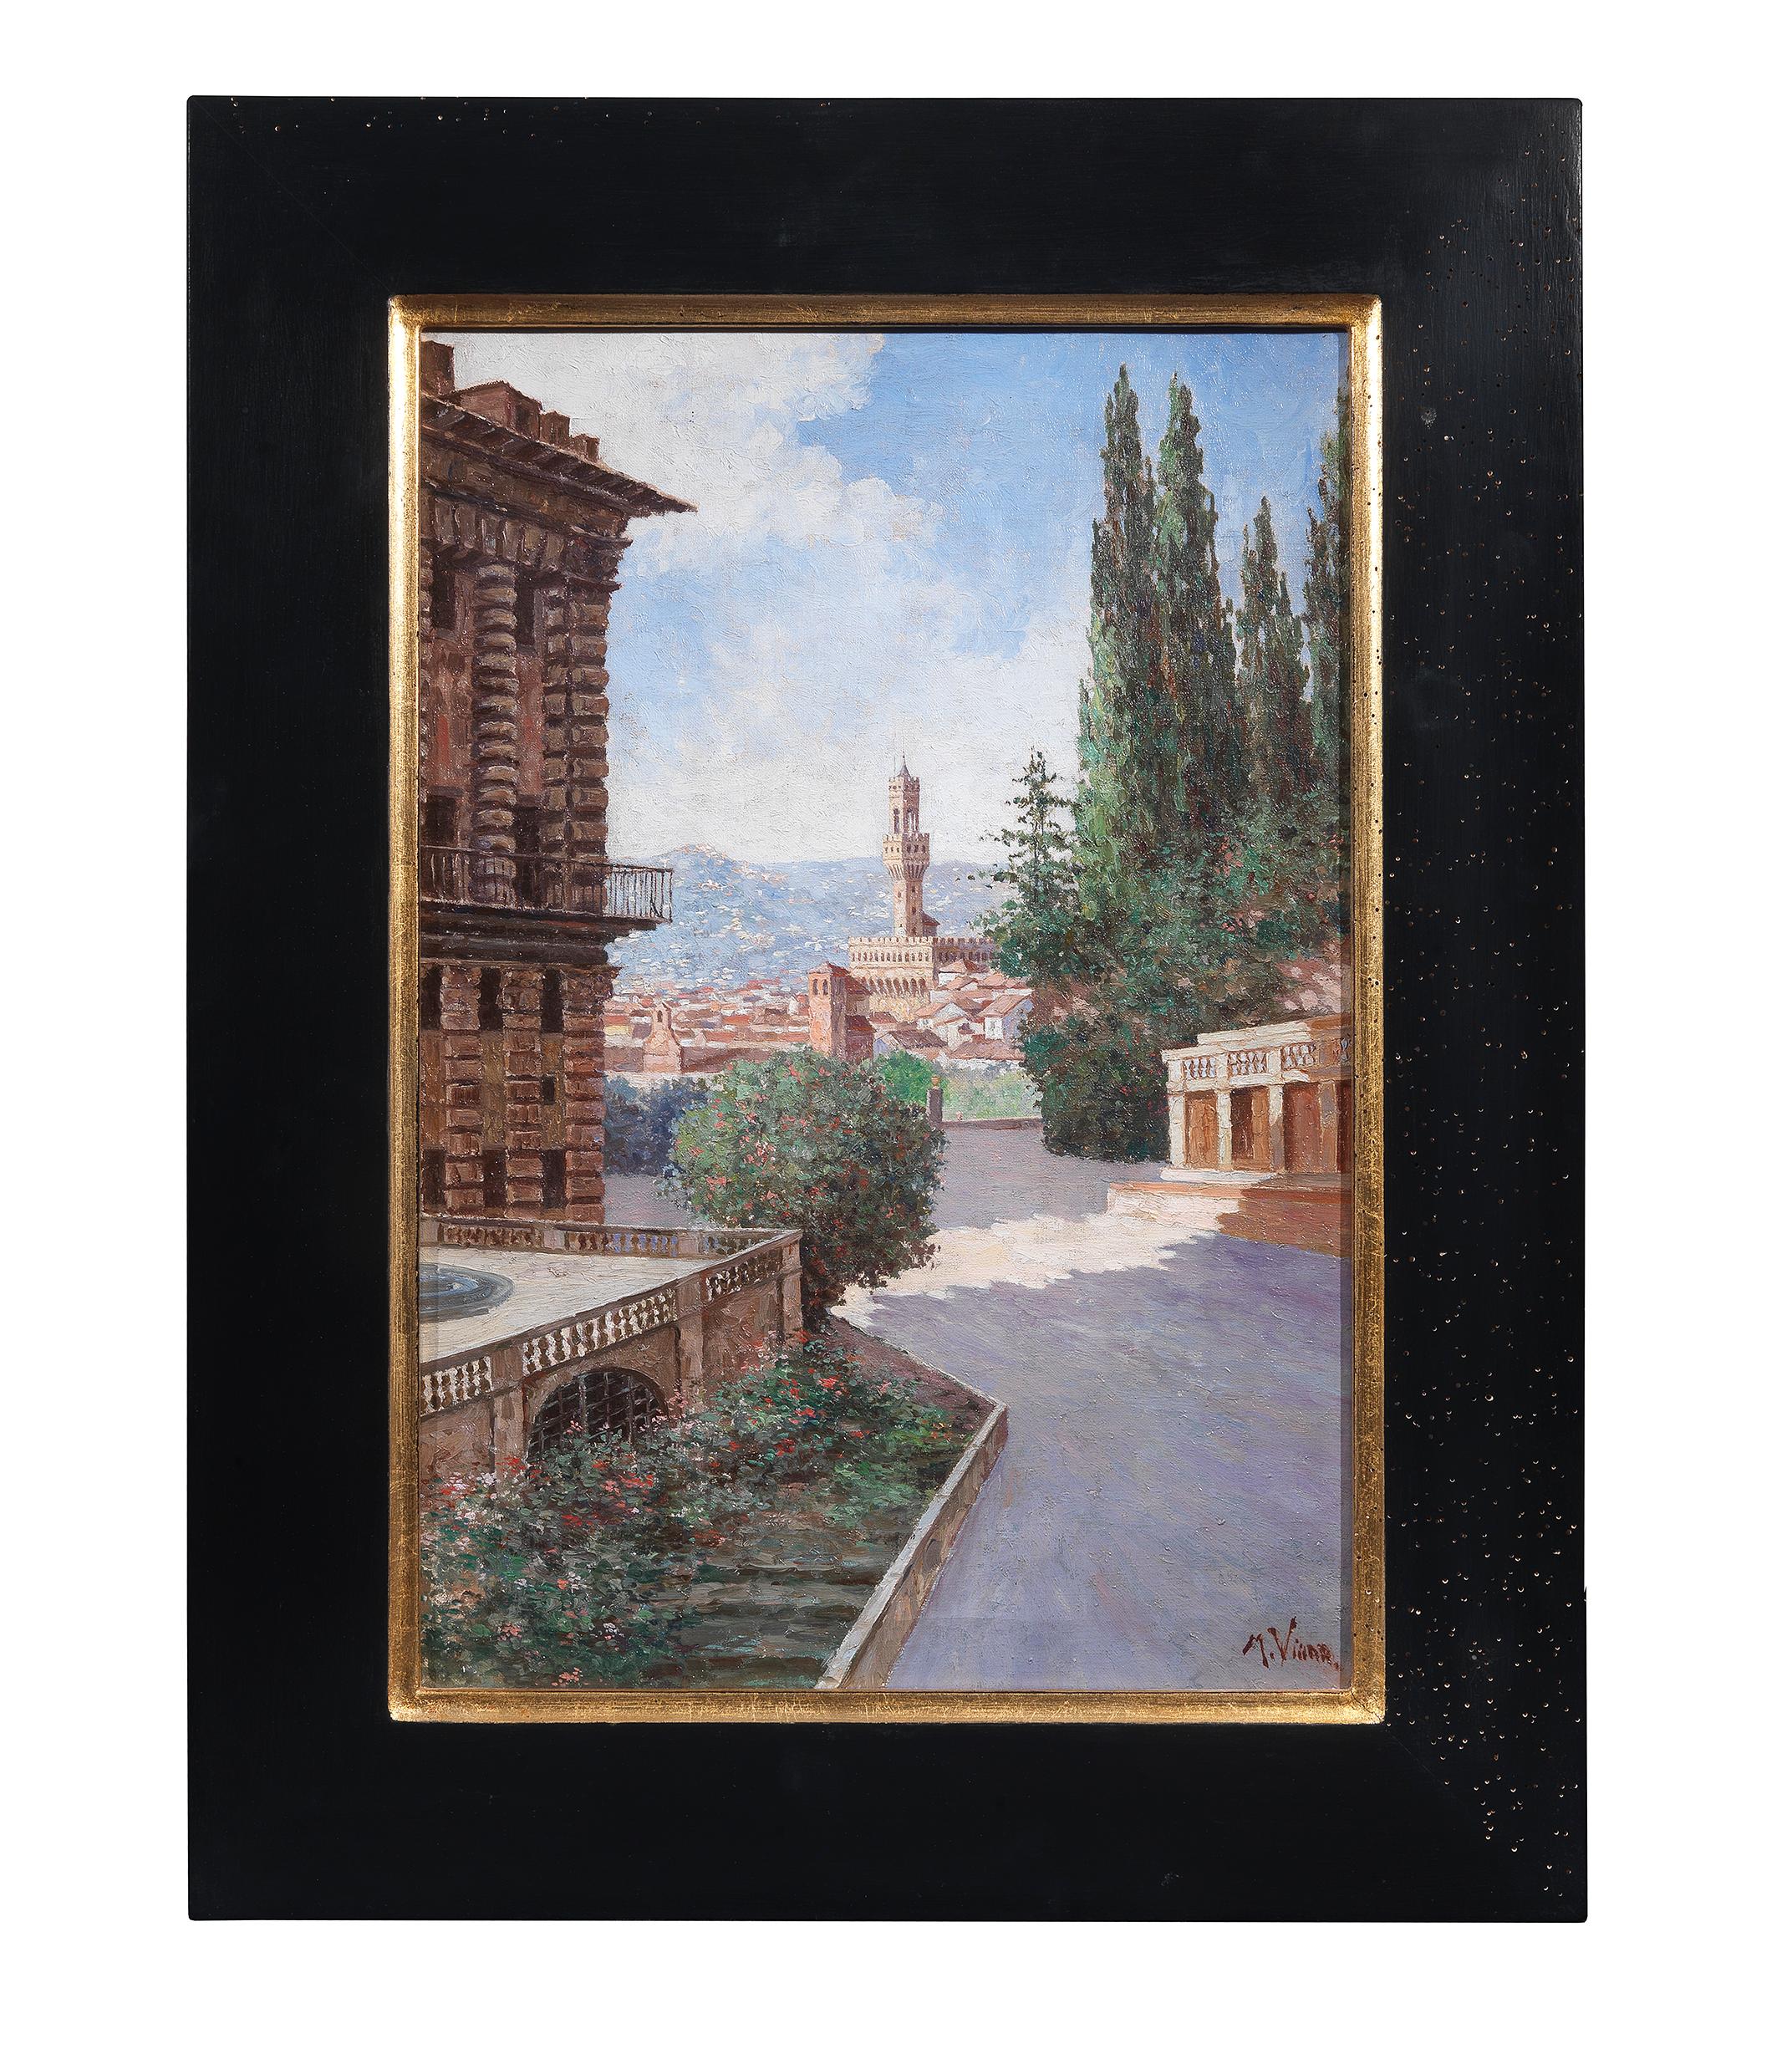 SHIPPING POLICY:
No additional costs will be added to this order.
Shipping costs will be totally covered by the seller (customs duties included). 

A view of the Pitti Palace, Florence, with the Palazzo Vecchio
oil on canvas
Measures: 46cm x 32cm.